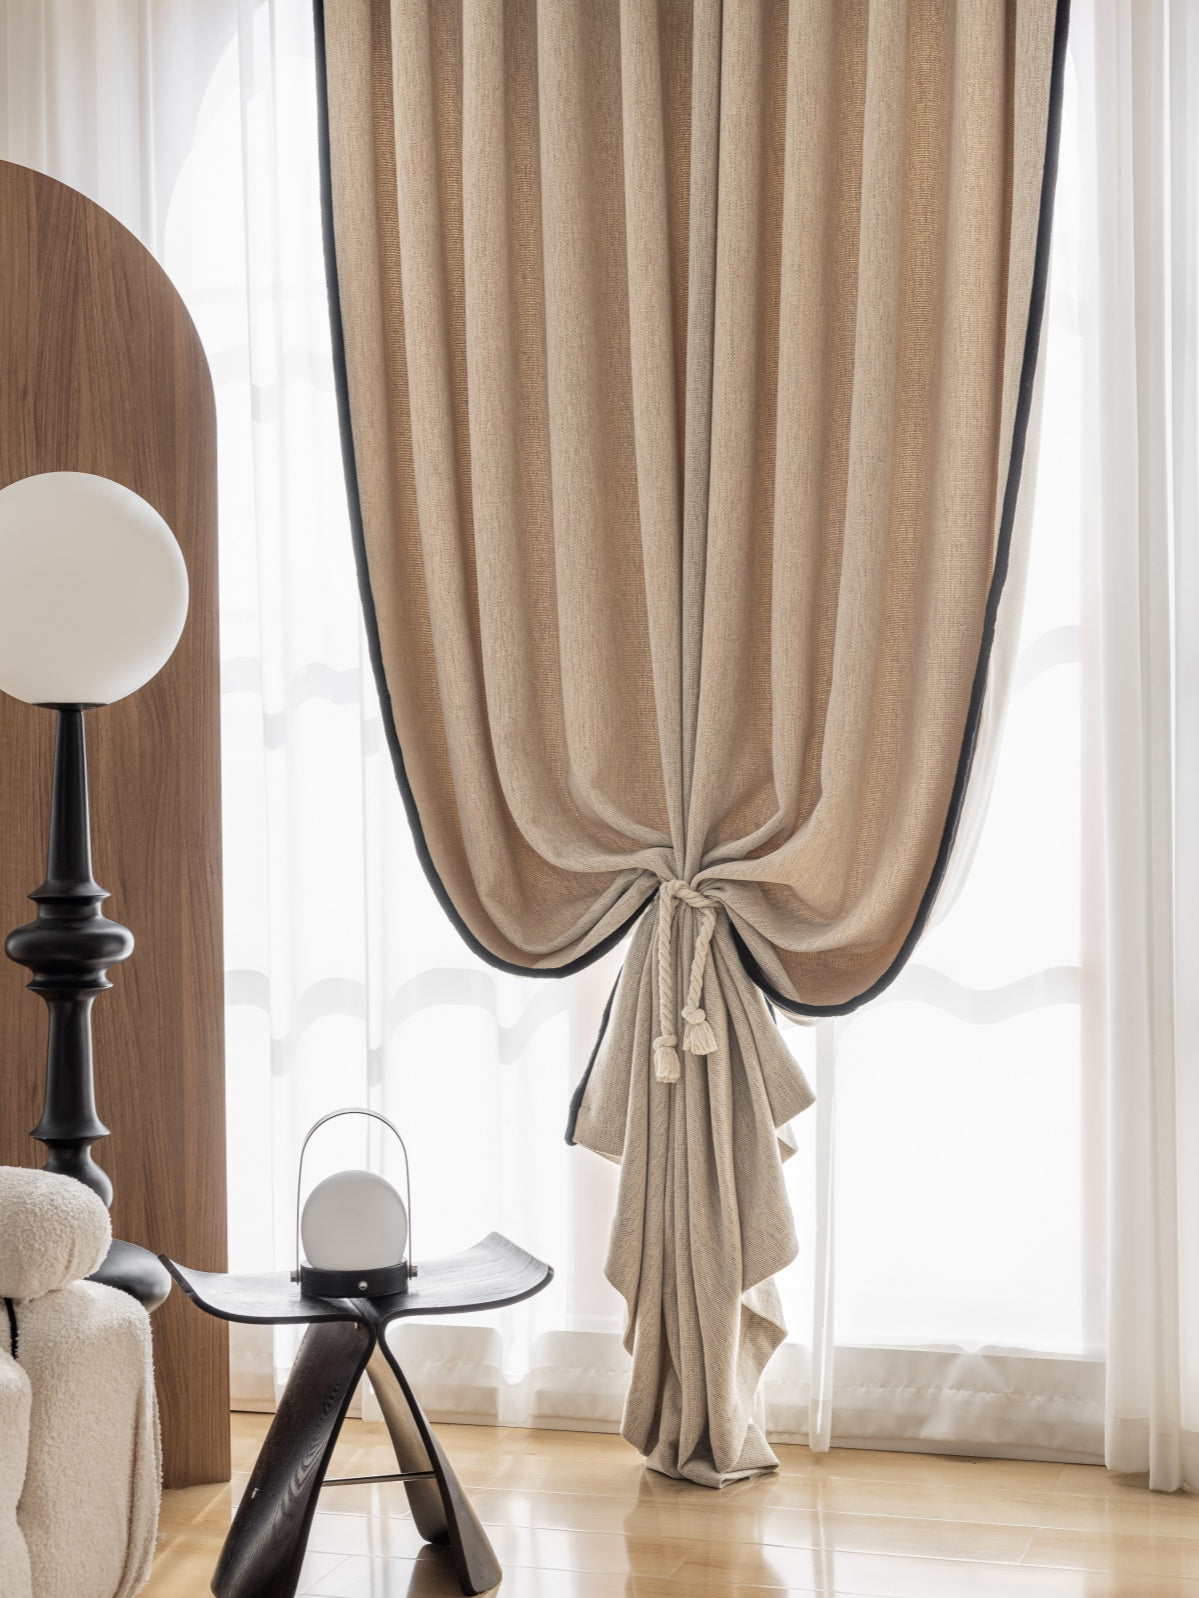 Elegant heavyweight chenille pleated curtain in taupe, tied back in a luxurious bedroom setting with contemporary decor